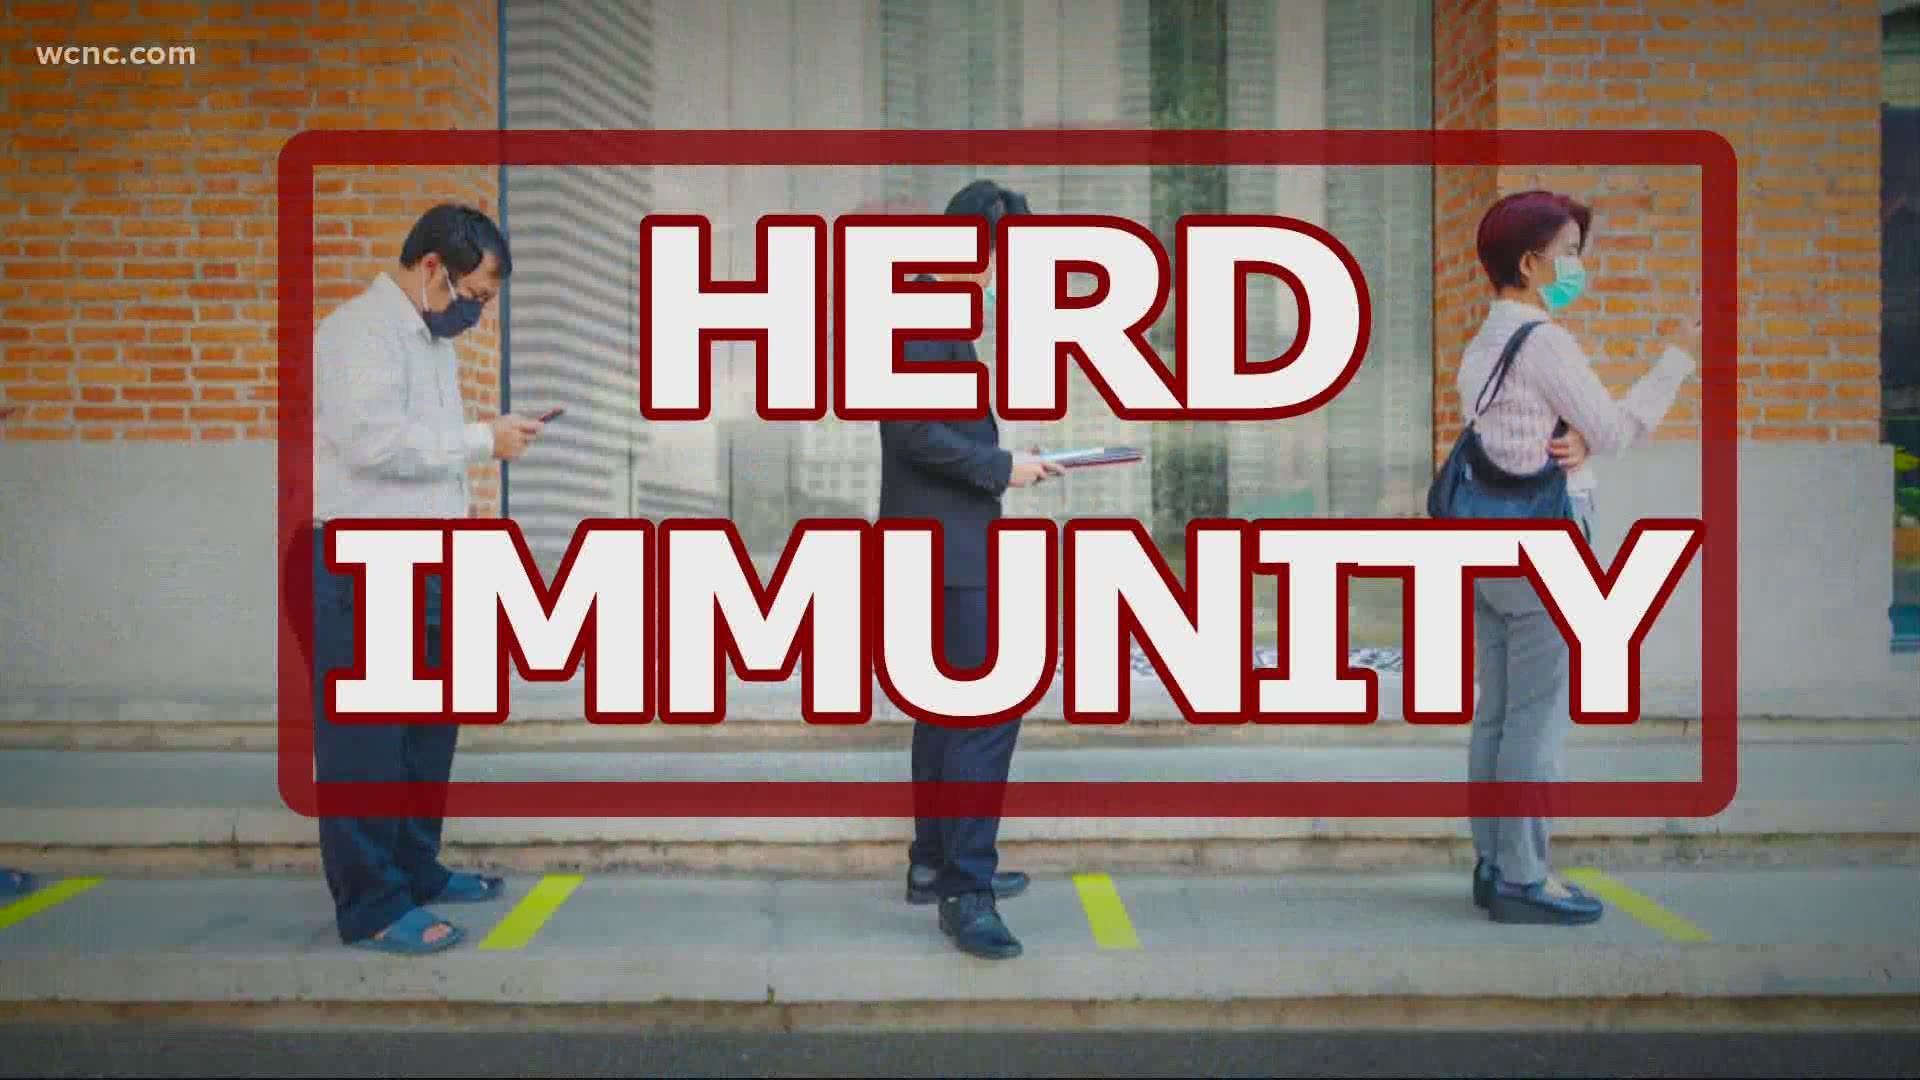 Herd immunity is needed to officially get a handle on COVID-19 in the community.